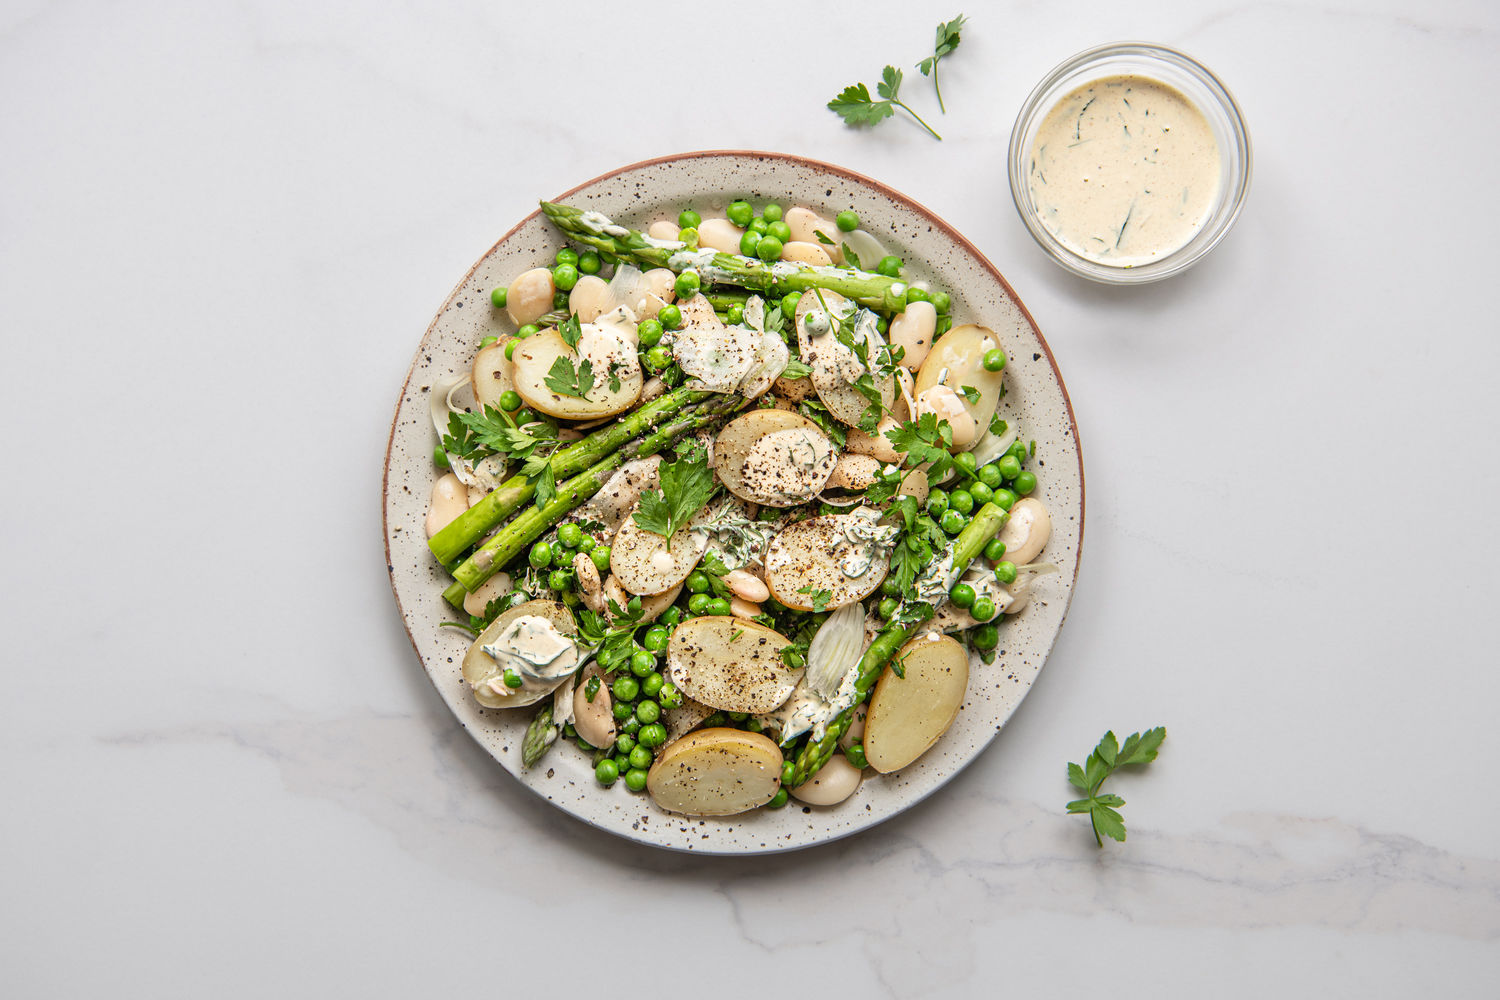 New Potato and Asparagus Salad with Ranch Dressing